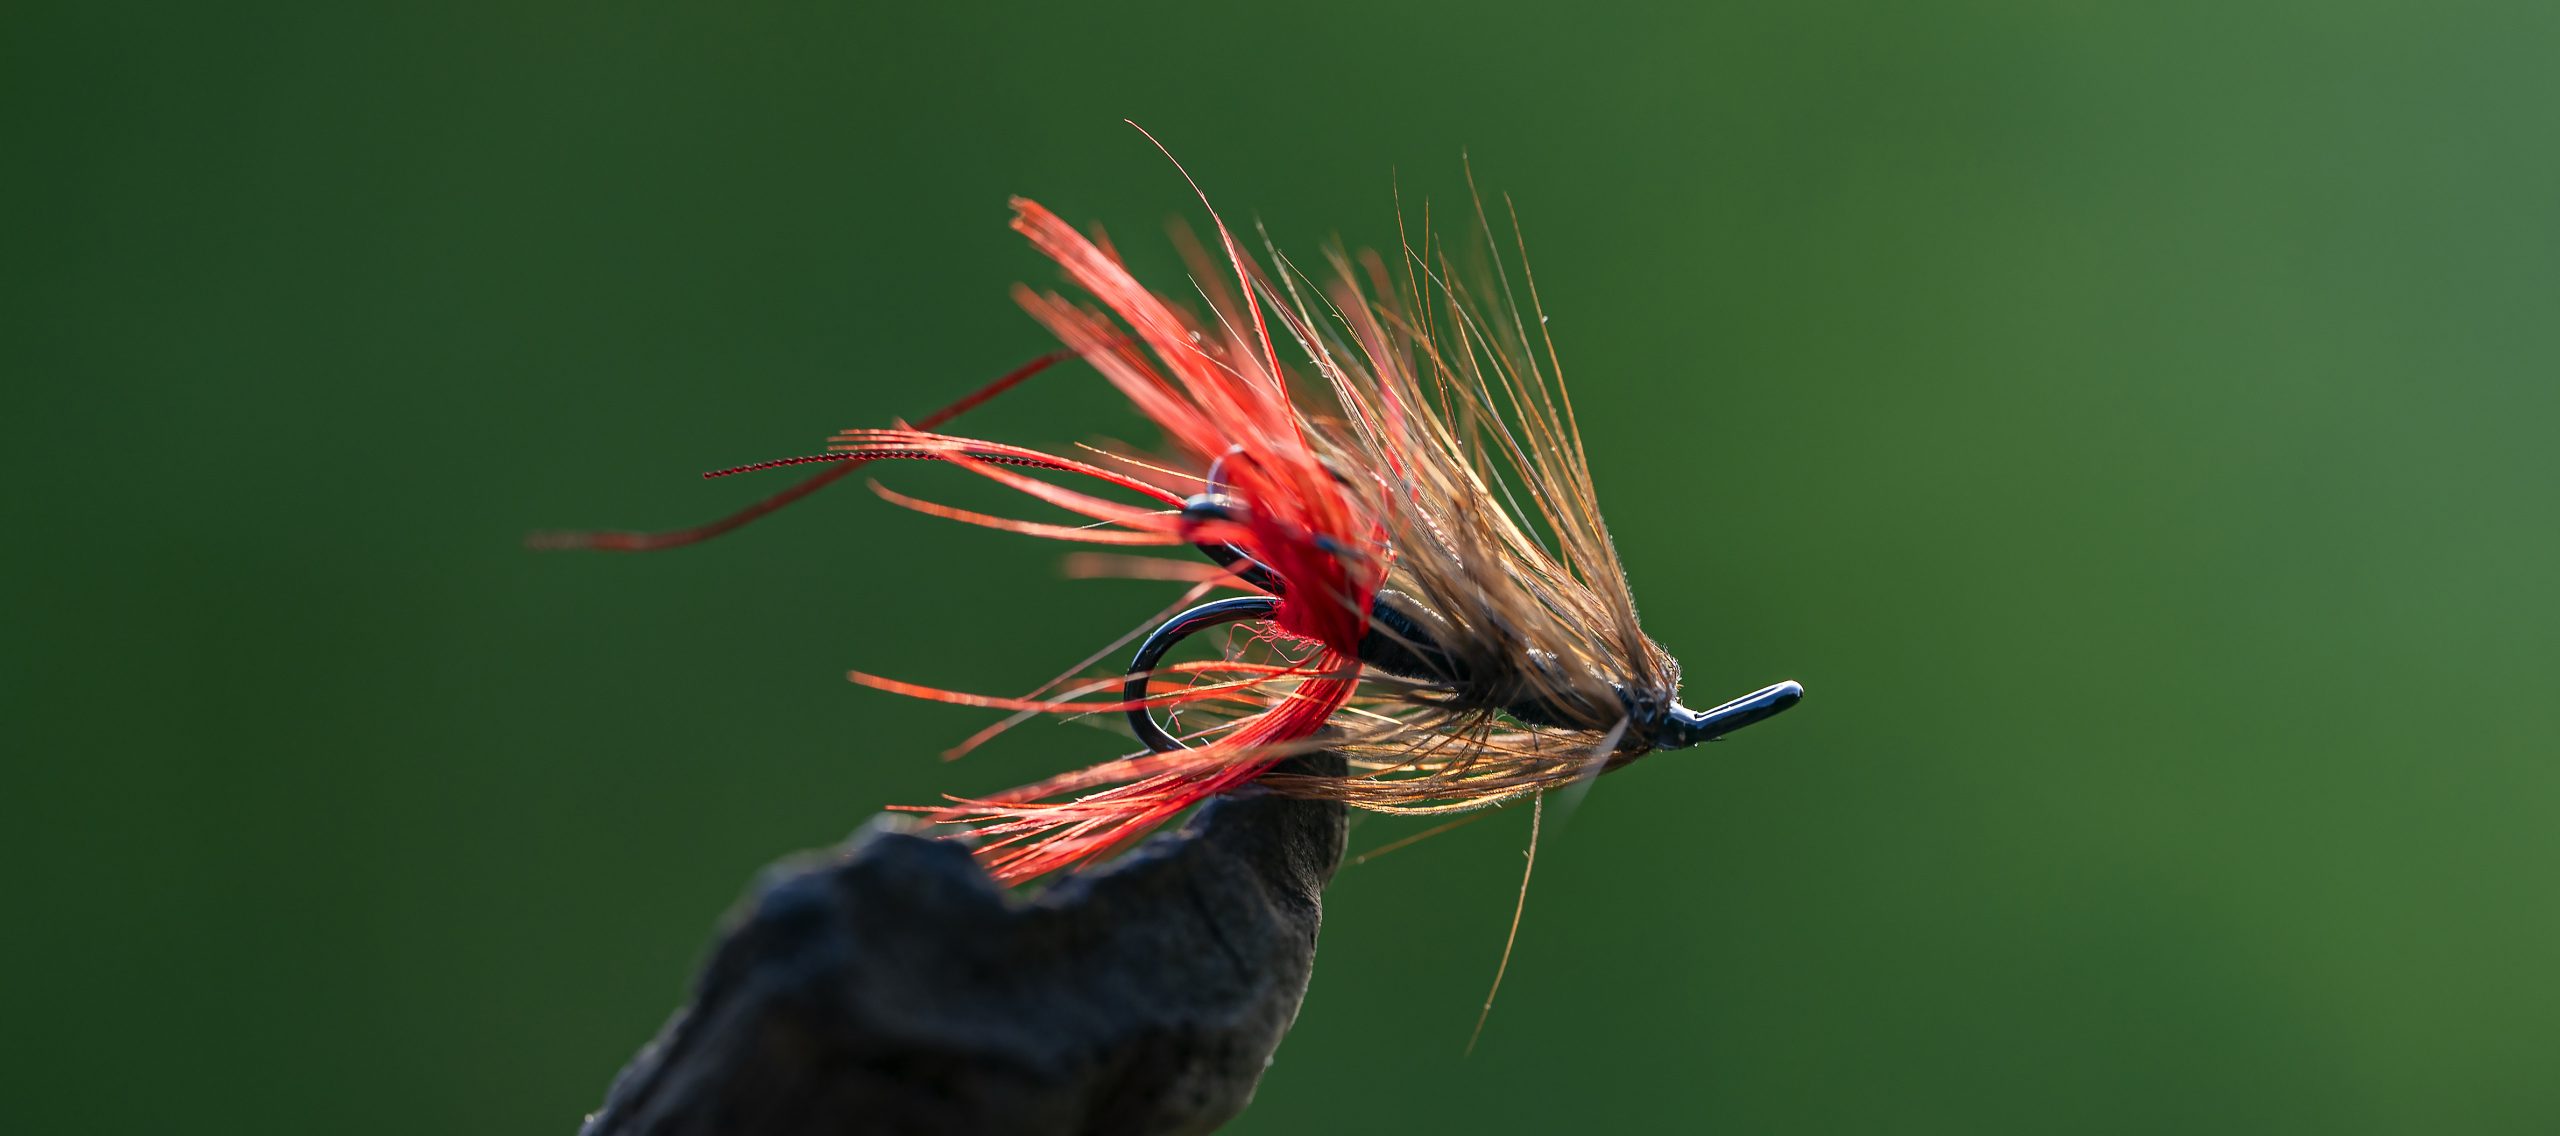 FW500/501 – DRY FLY TRADITIONAL - Ahrex Hooks